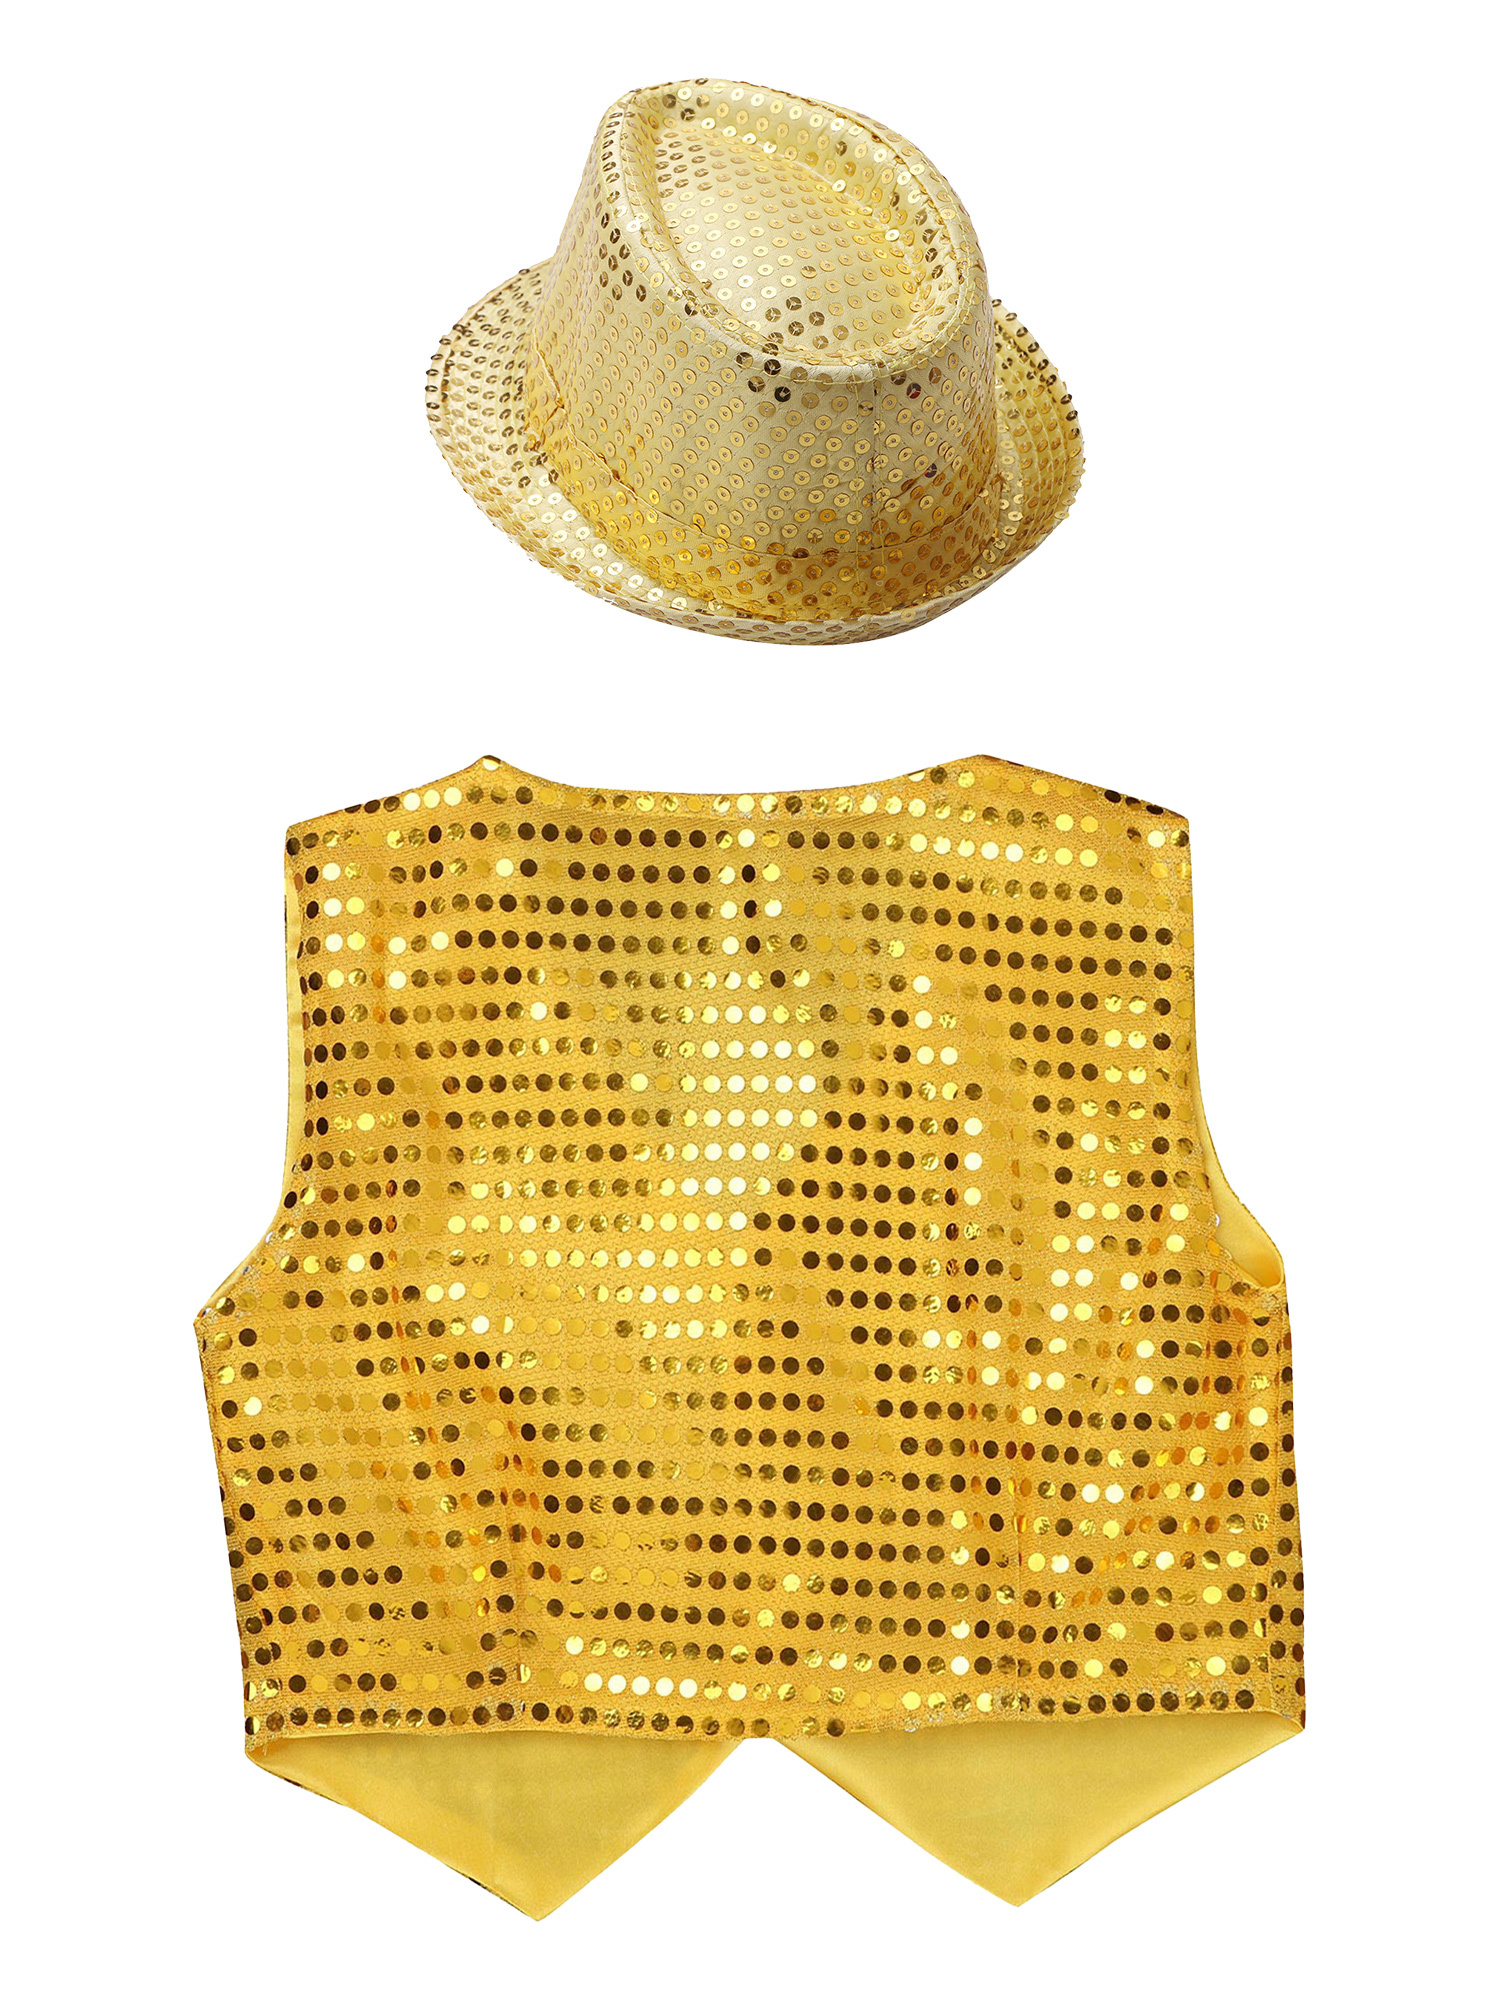 IEFIEL Kids Boys Sparkle Sequins Button Down Vest with Hat Dance Outfit Set Hip Hop Jazz Stage Performance Costume Gold 11-12 - image 4 of 7